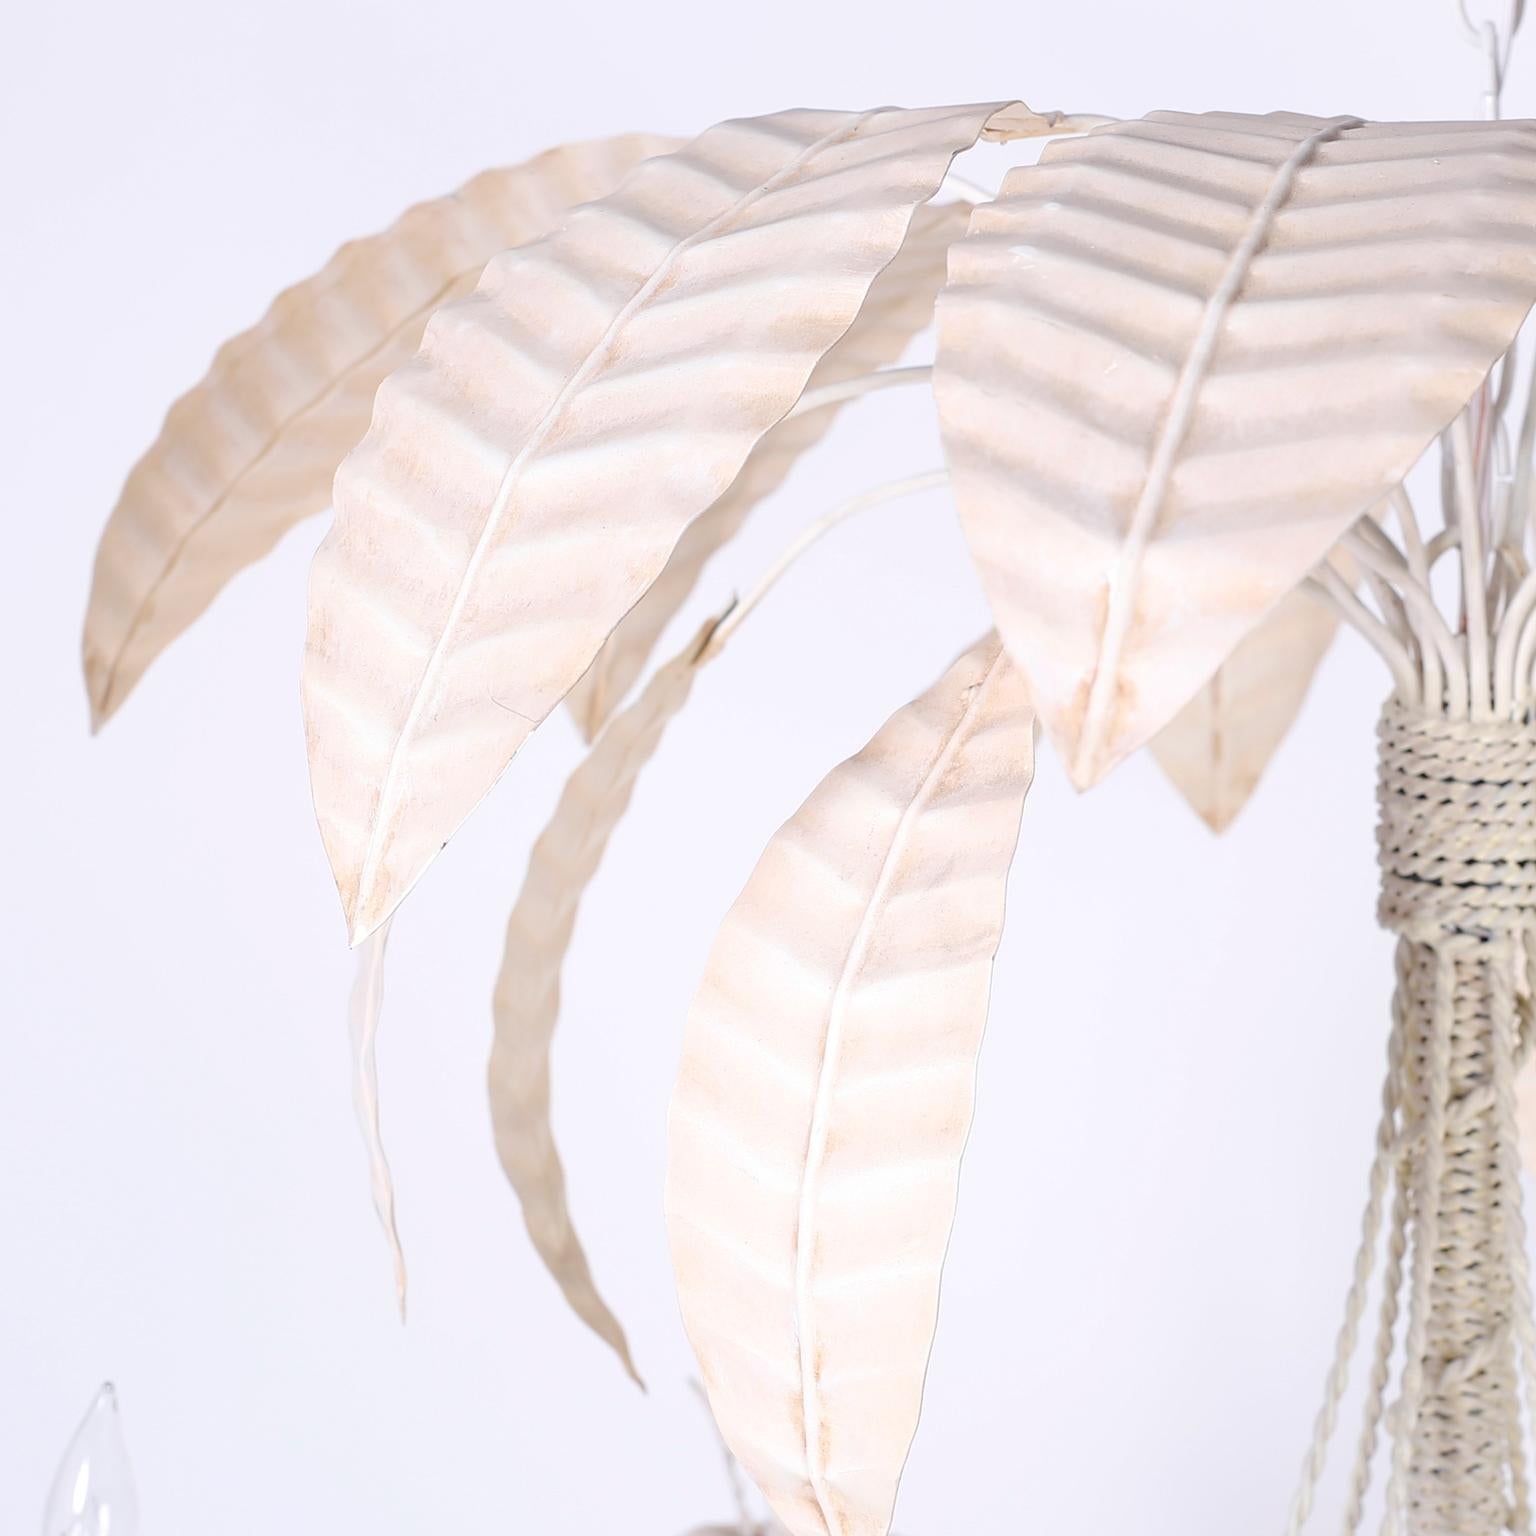 Midcentury Italian tole chandelier in white with a hip tropical vibe. Featuring palm fronds at the top wrapped in metal string, attached to six graceful arms with leaf candle cups.